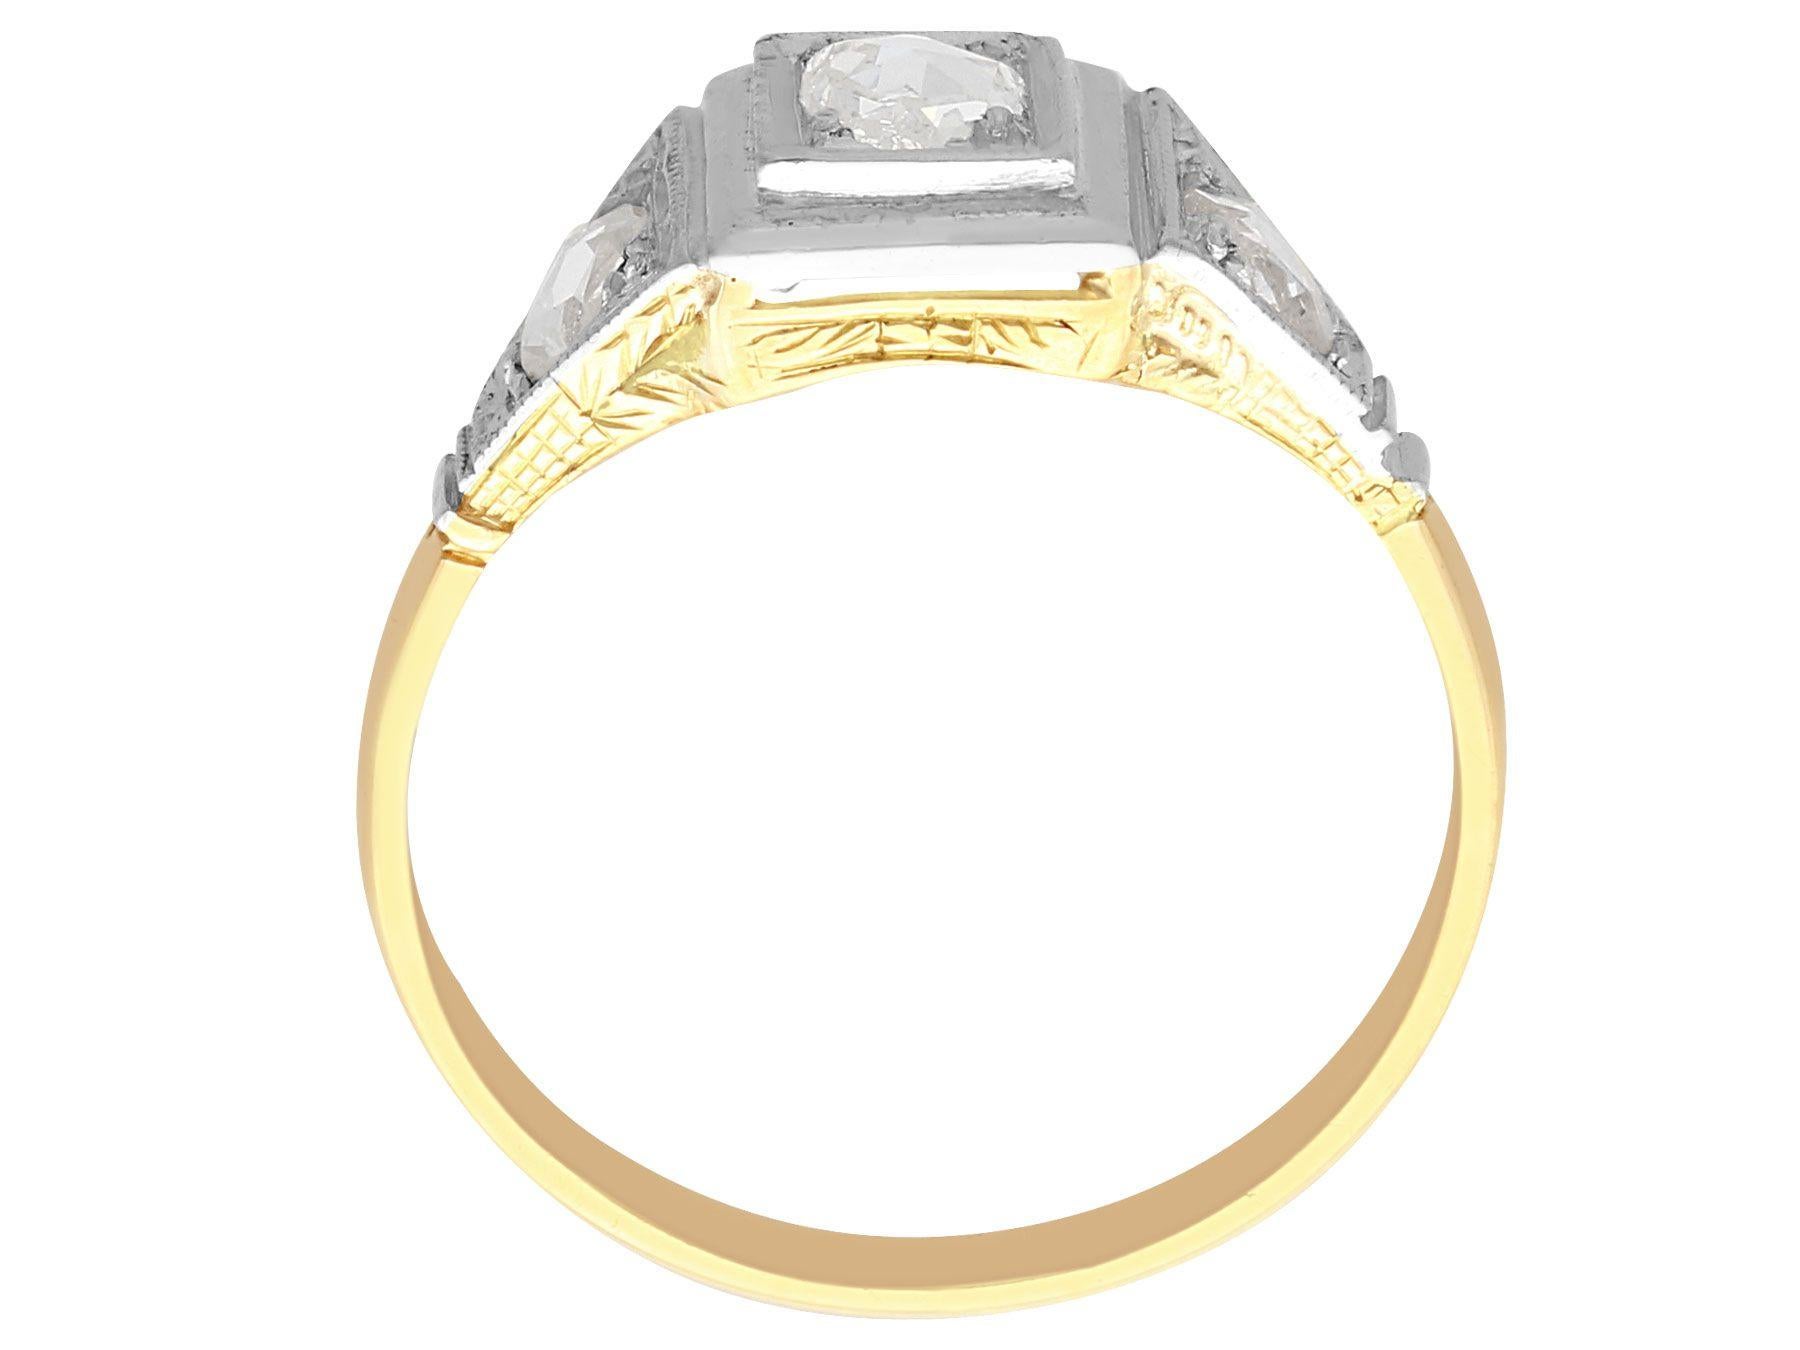 Women's 1910s Antique Diamond and Yellow Gold Cocktail Ring